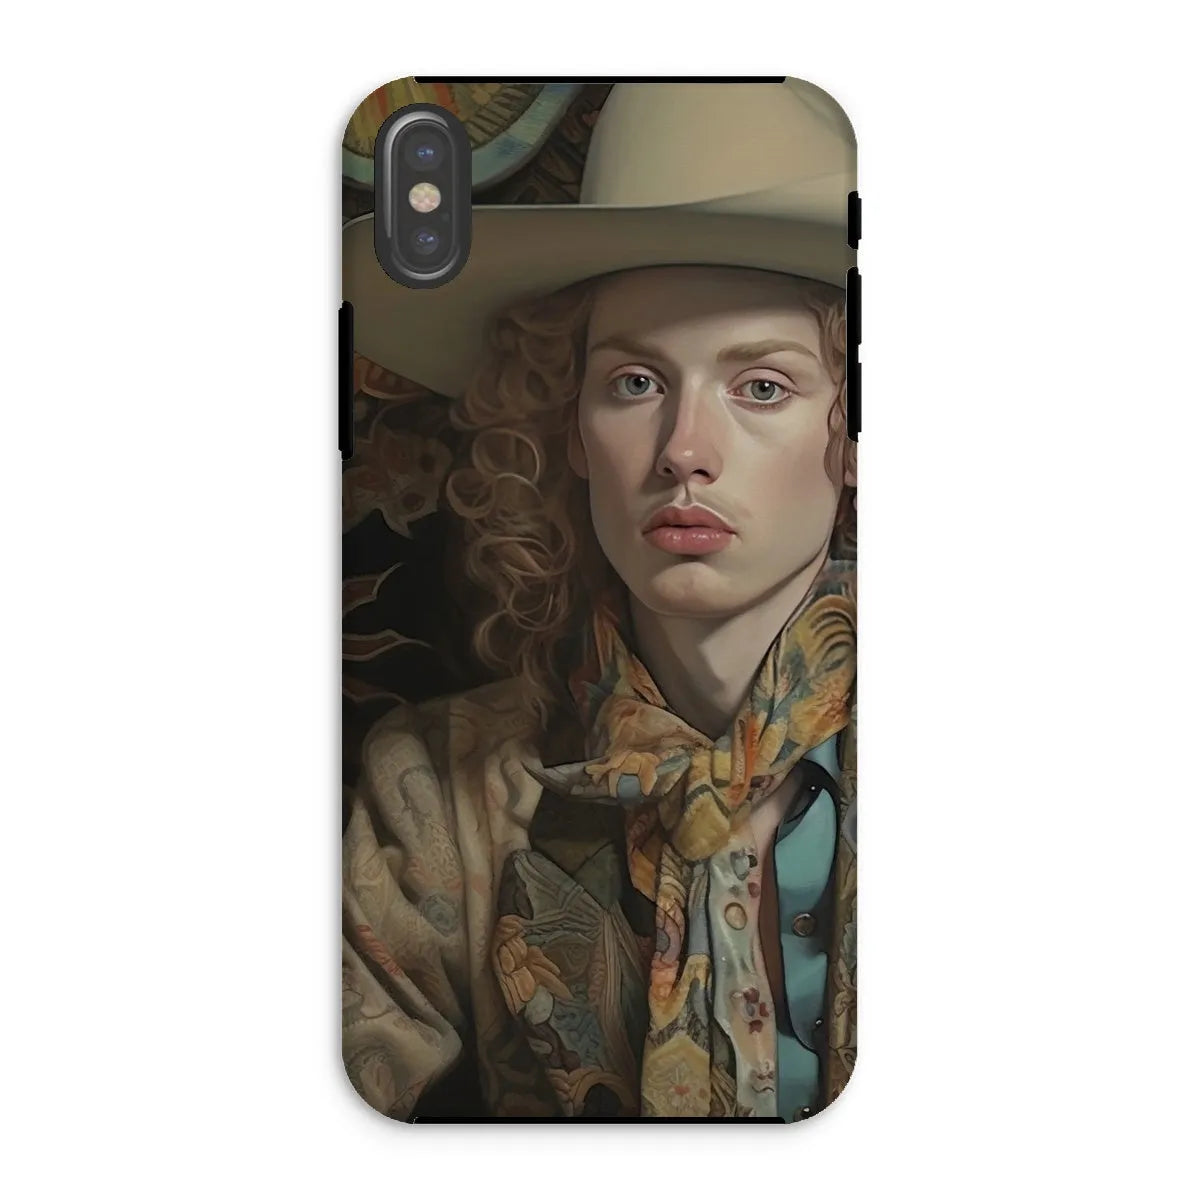 Ollie The Transgender Cowboy - F2m Dandy Outlaw Phone Case - Iphone Xs / Matte - Mobile Phone Cases - Aesthetic Art